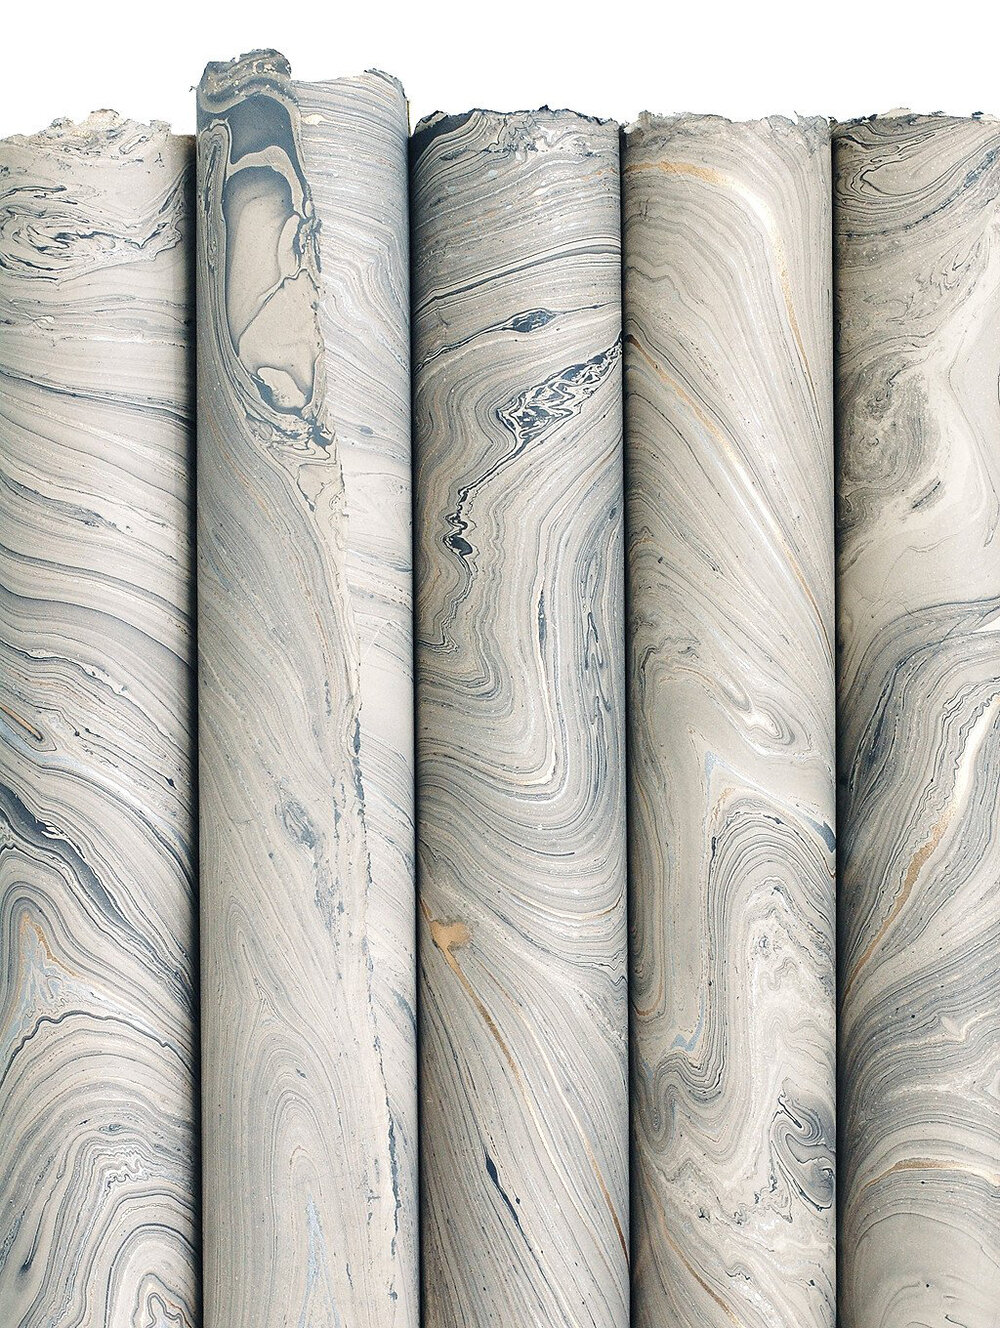 Navy Marble Wrapping Paper — Jonathan Wright and Company